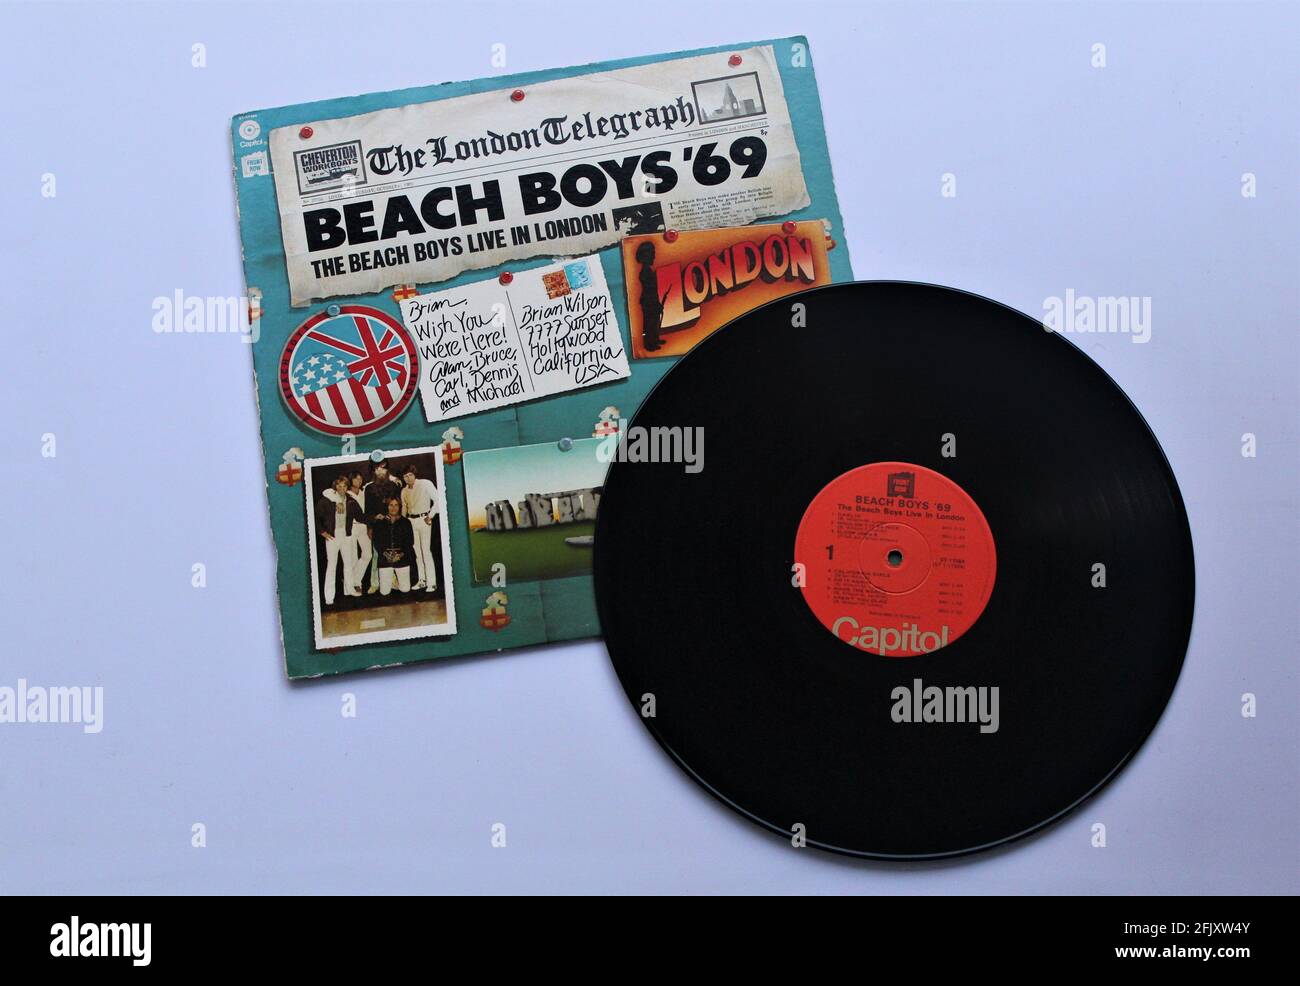 The Band 1969 High Resolution Stock Photography and Images - Alamy